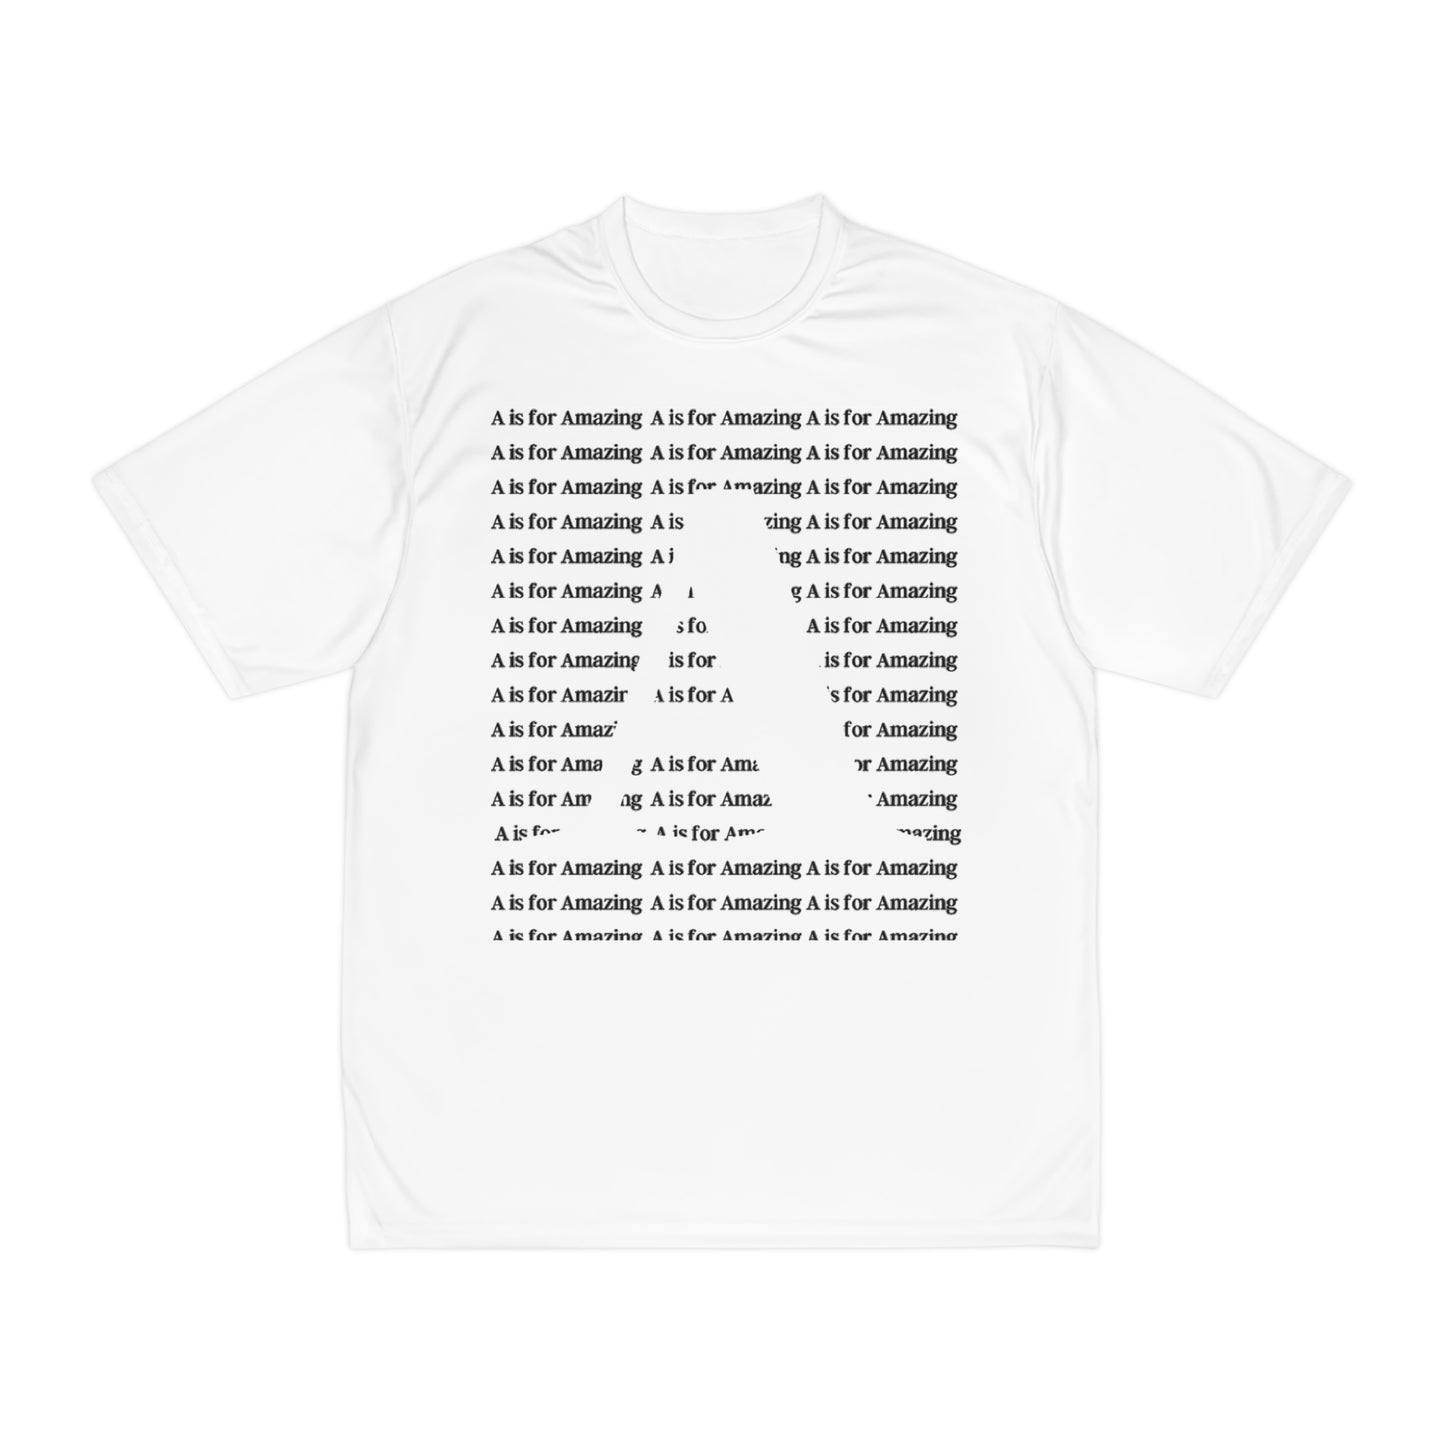 A is for Amazing Men's Performance T-Shirt